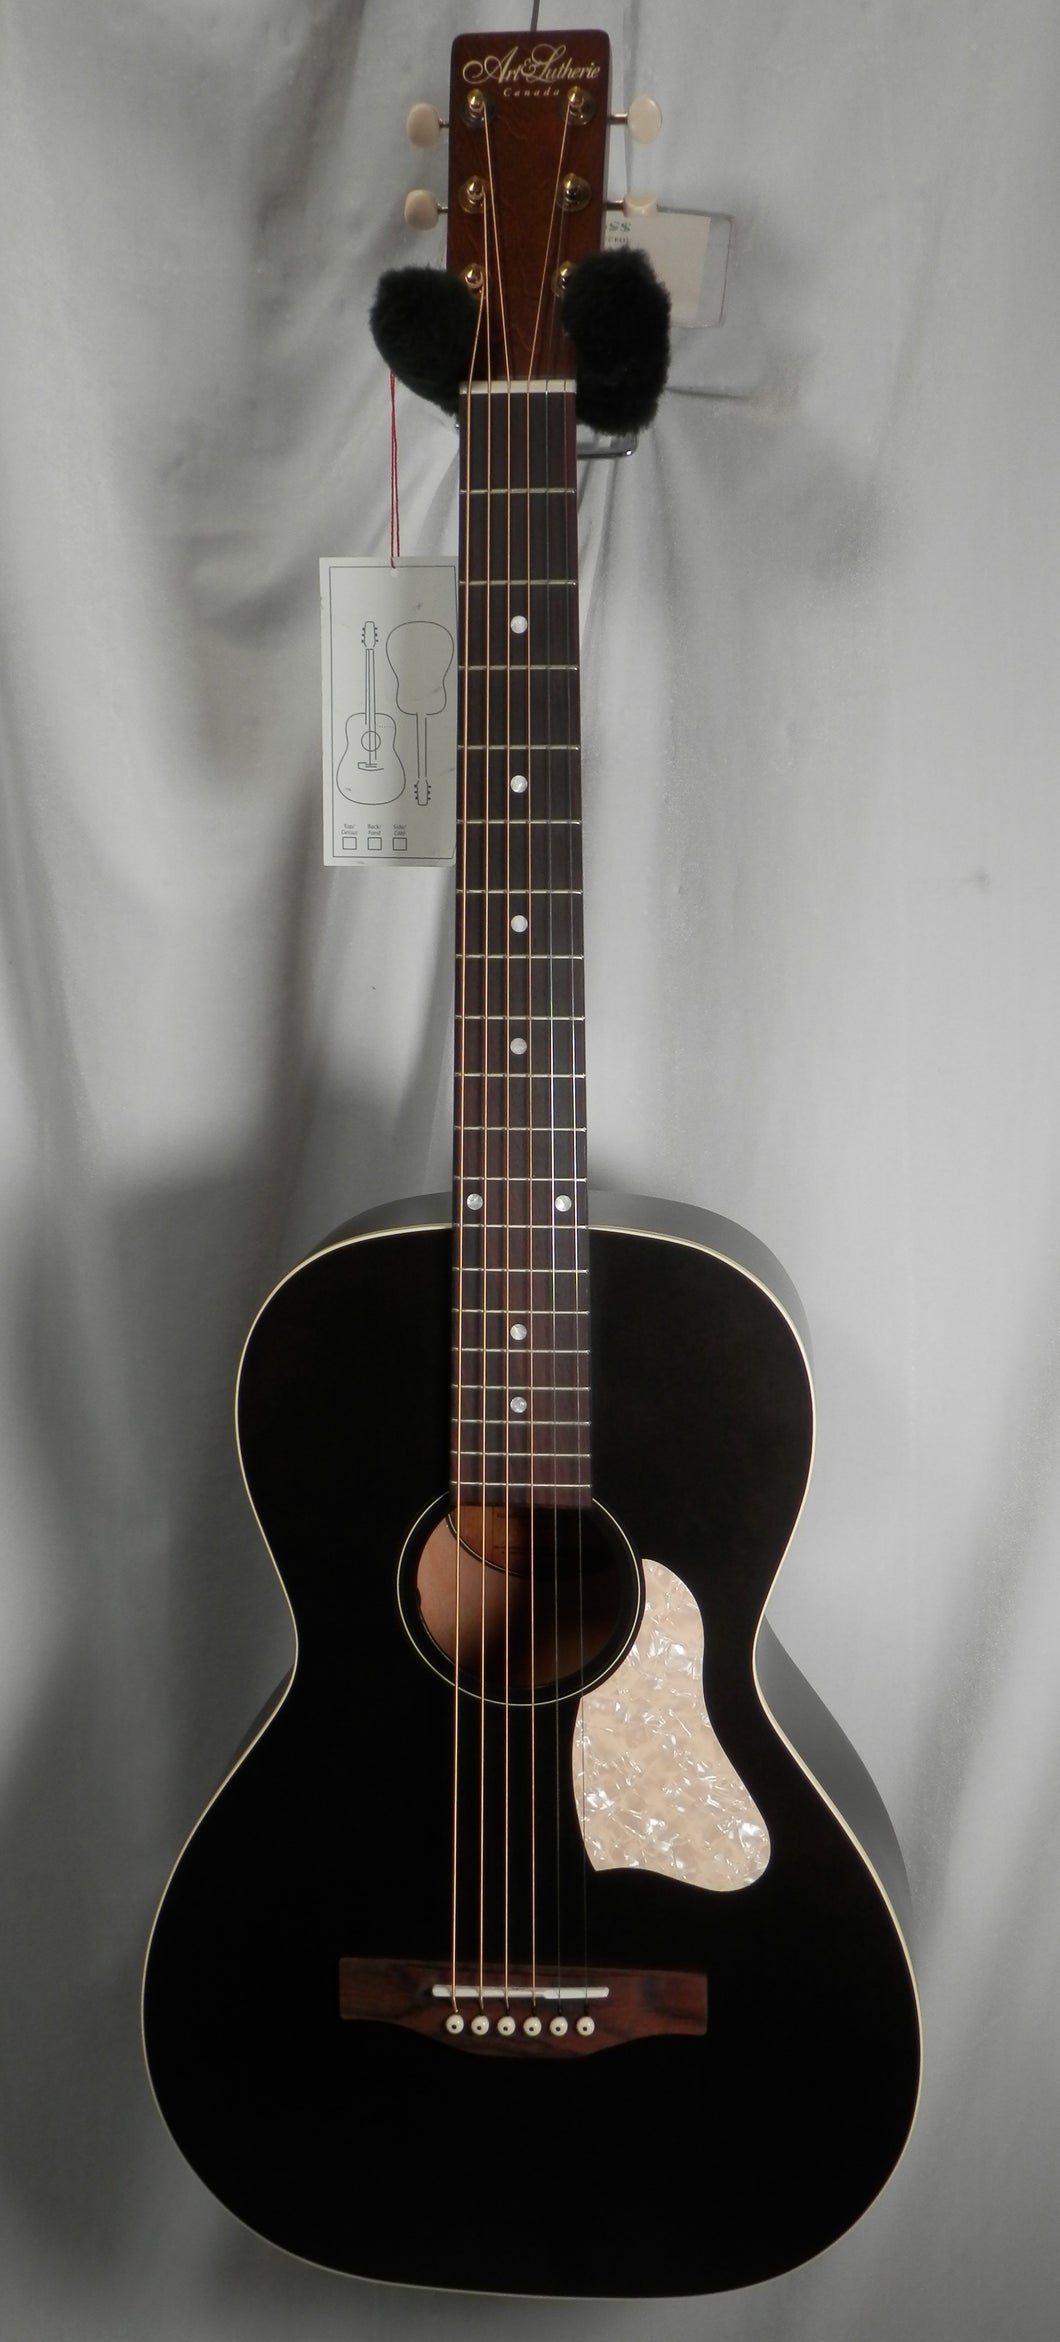 Art & Lutherie Roadhouse Faded Black Acoustic Electric Parlor Guitar(Model # 042418)